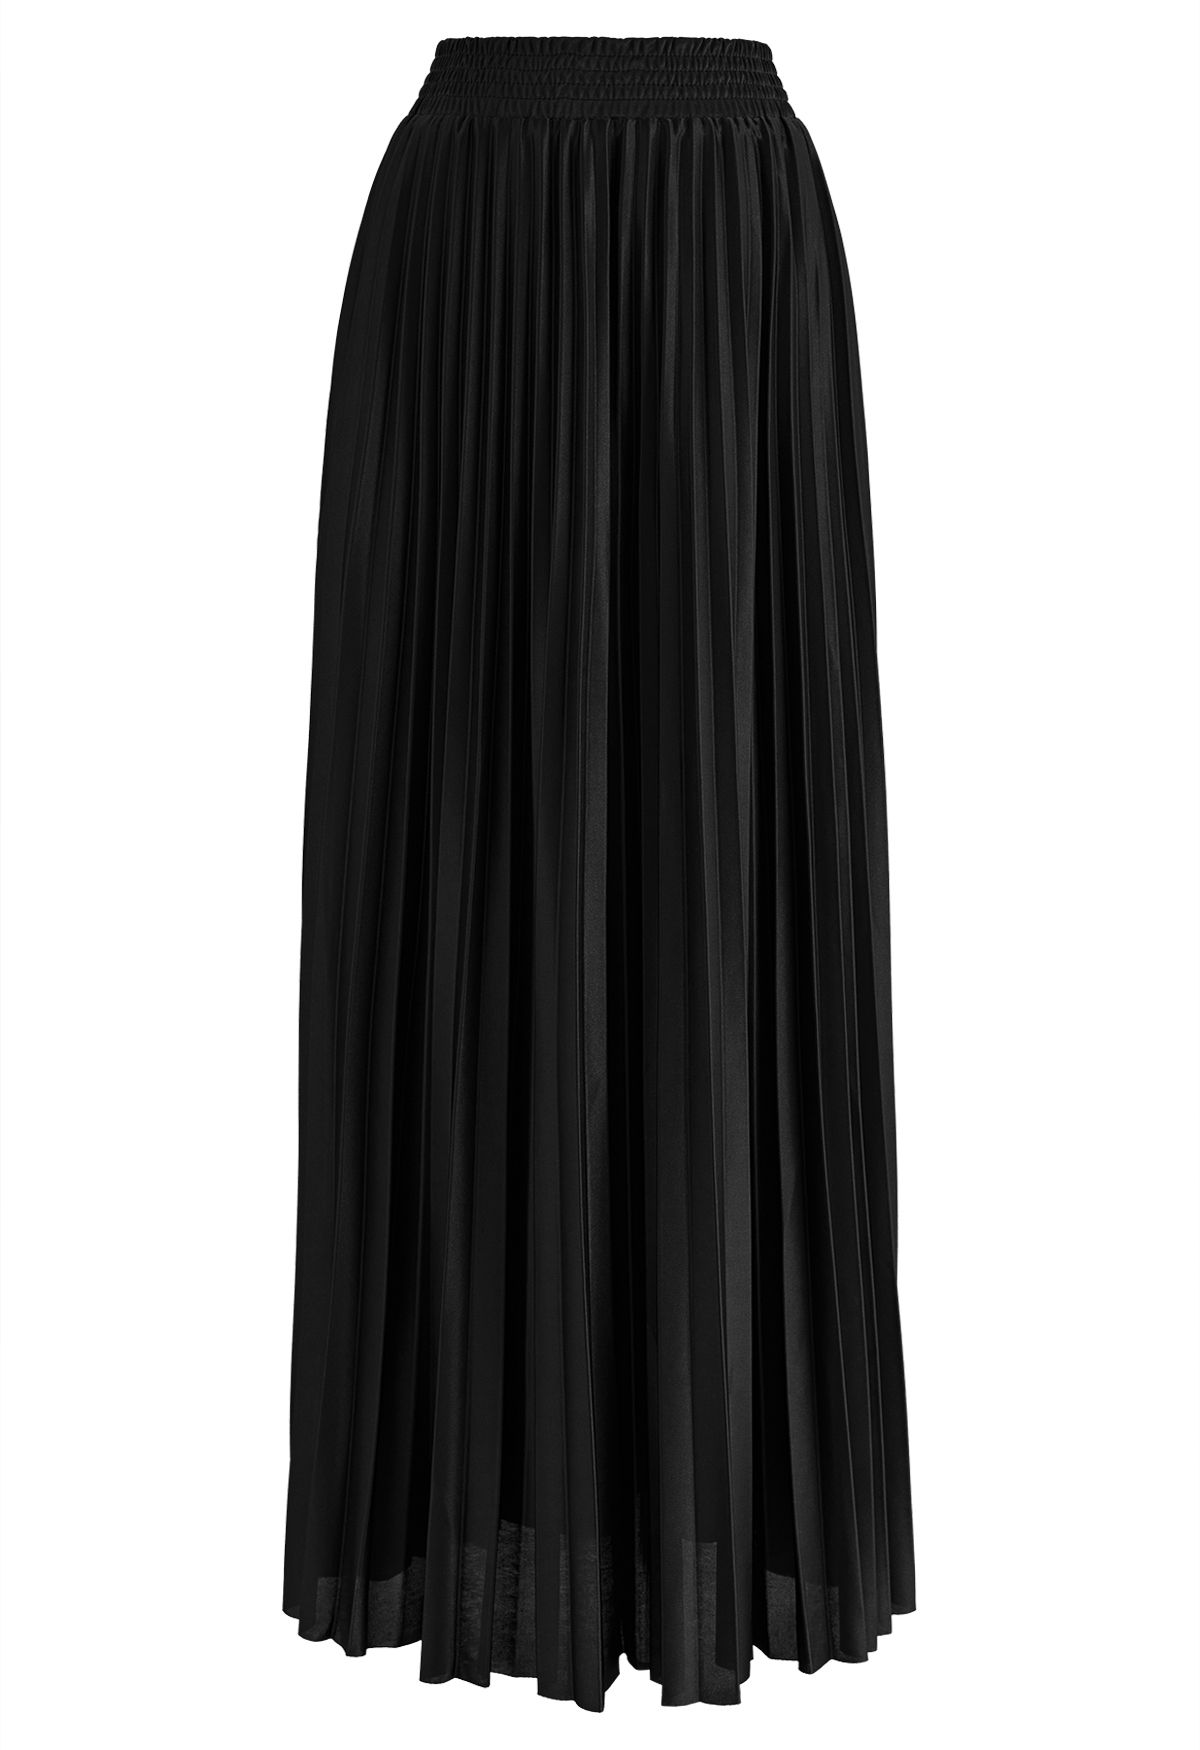 Glossy Pleated Maxi Skirt in Black